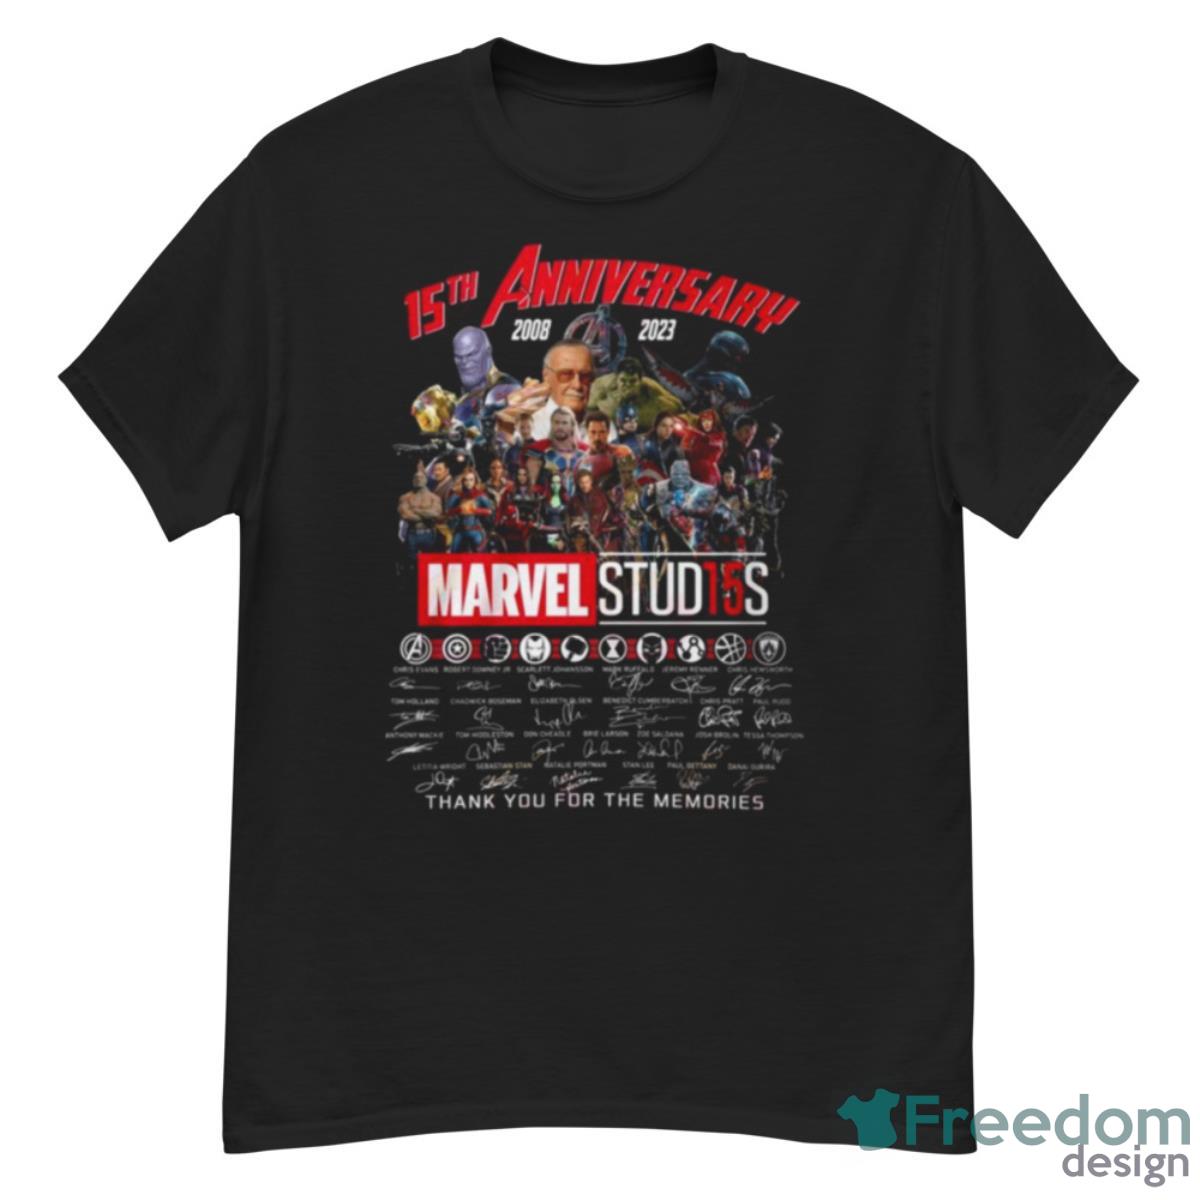 15th Anniversary 2008 – 2023 Marvel Stud15s Signature Thank You For The Memories T Shirt - G500 Men’s Classic T-Shirt